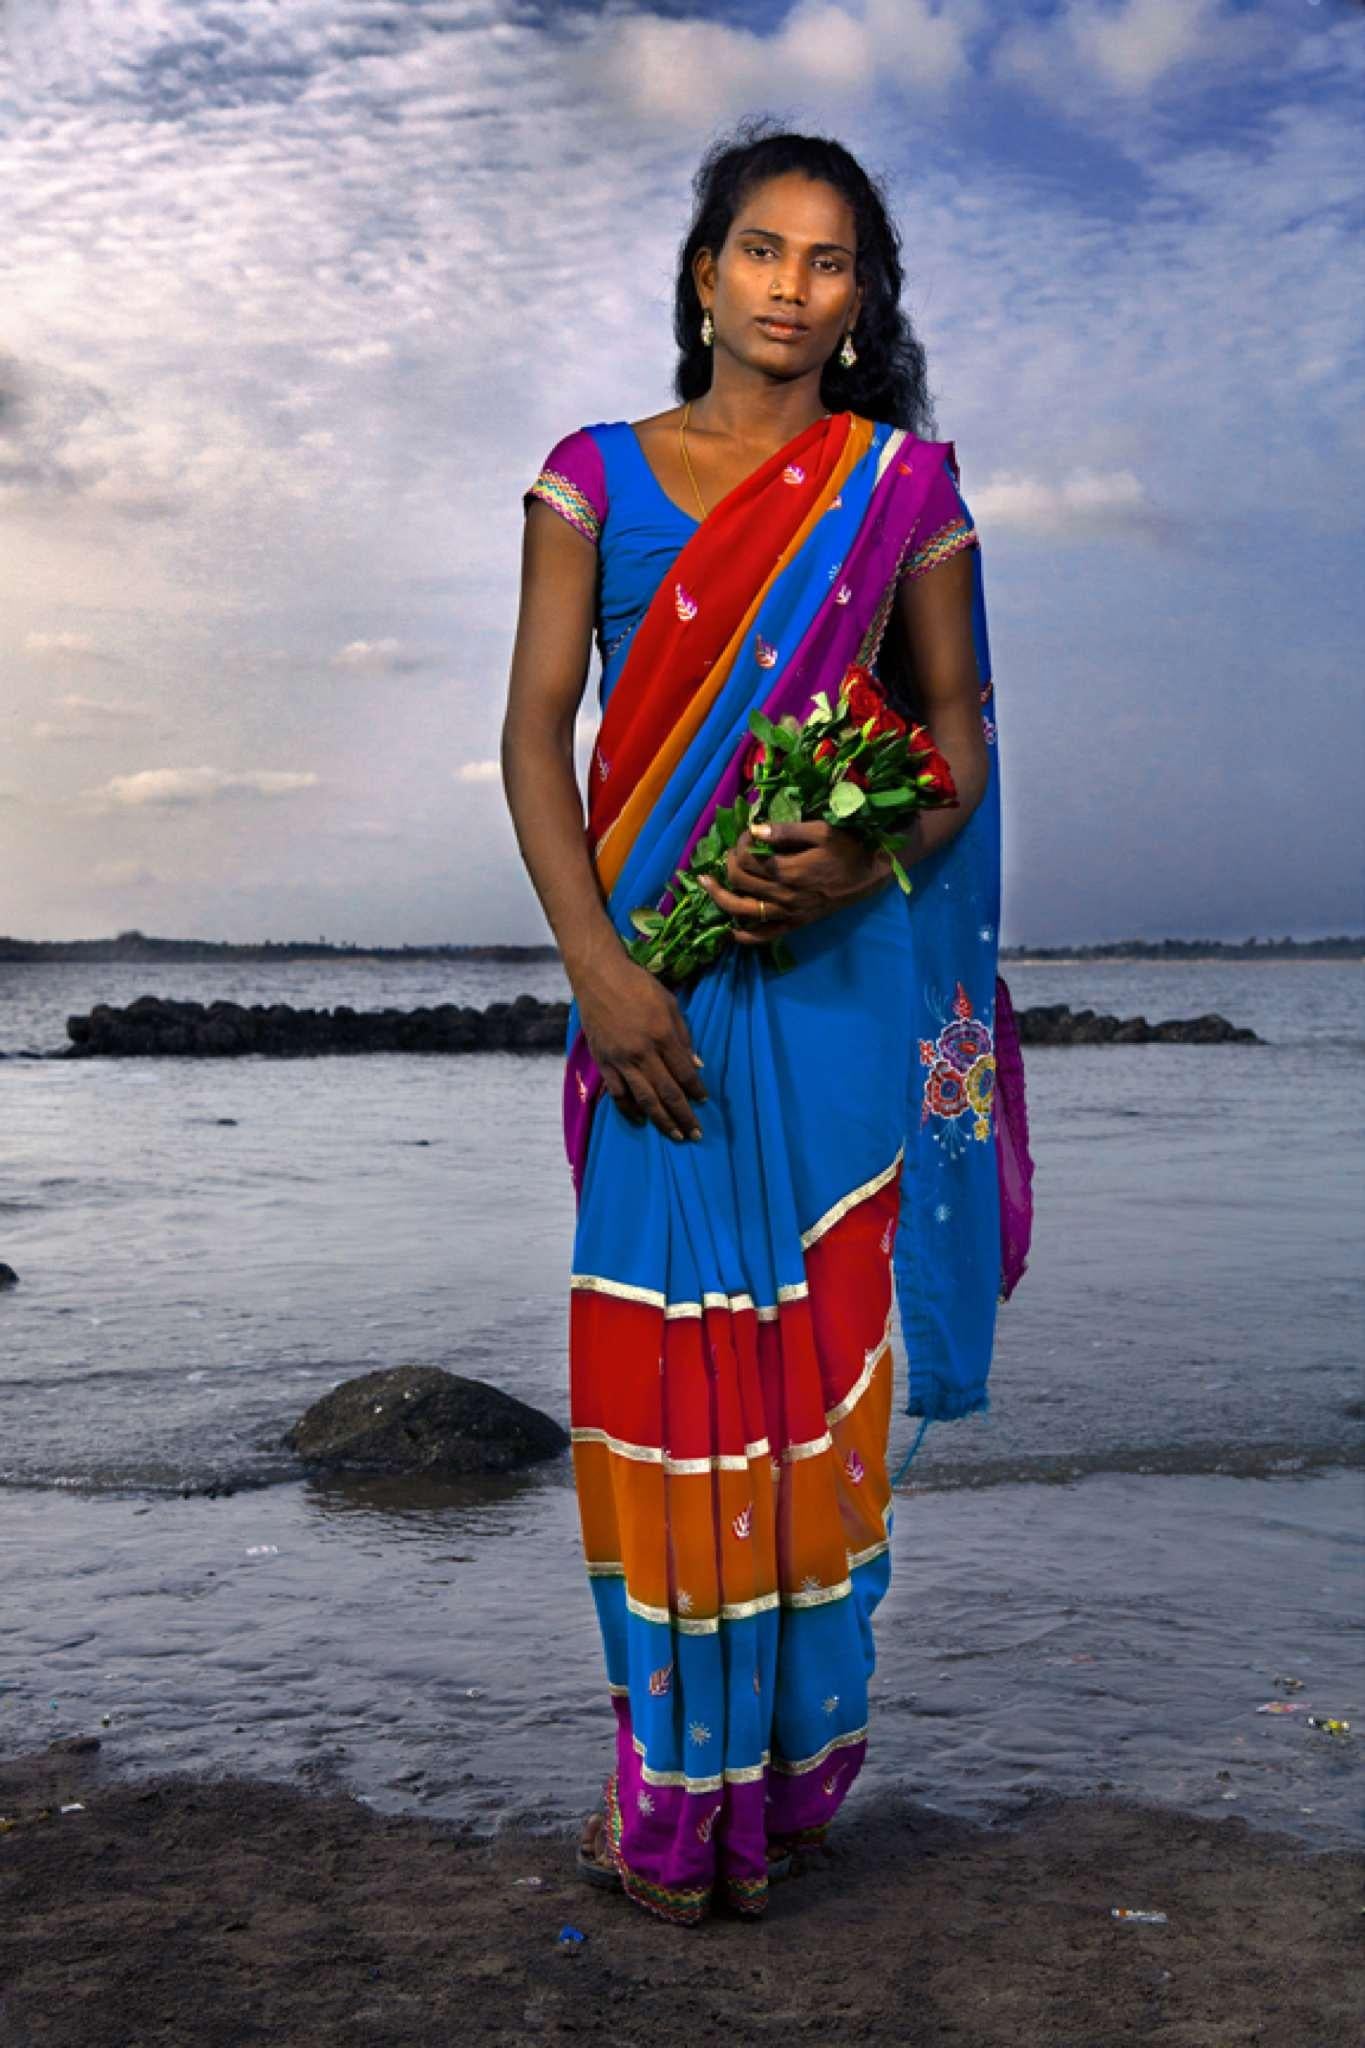 Jill Peters Color Photograph - Anusha, Protrait. From The Series The Third Gender of India